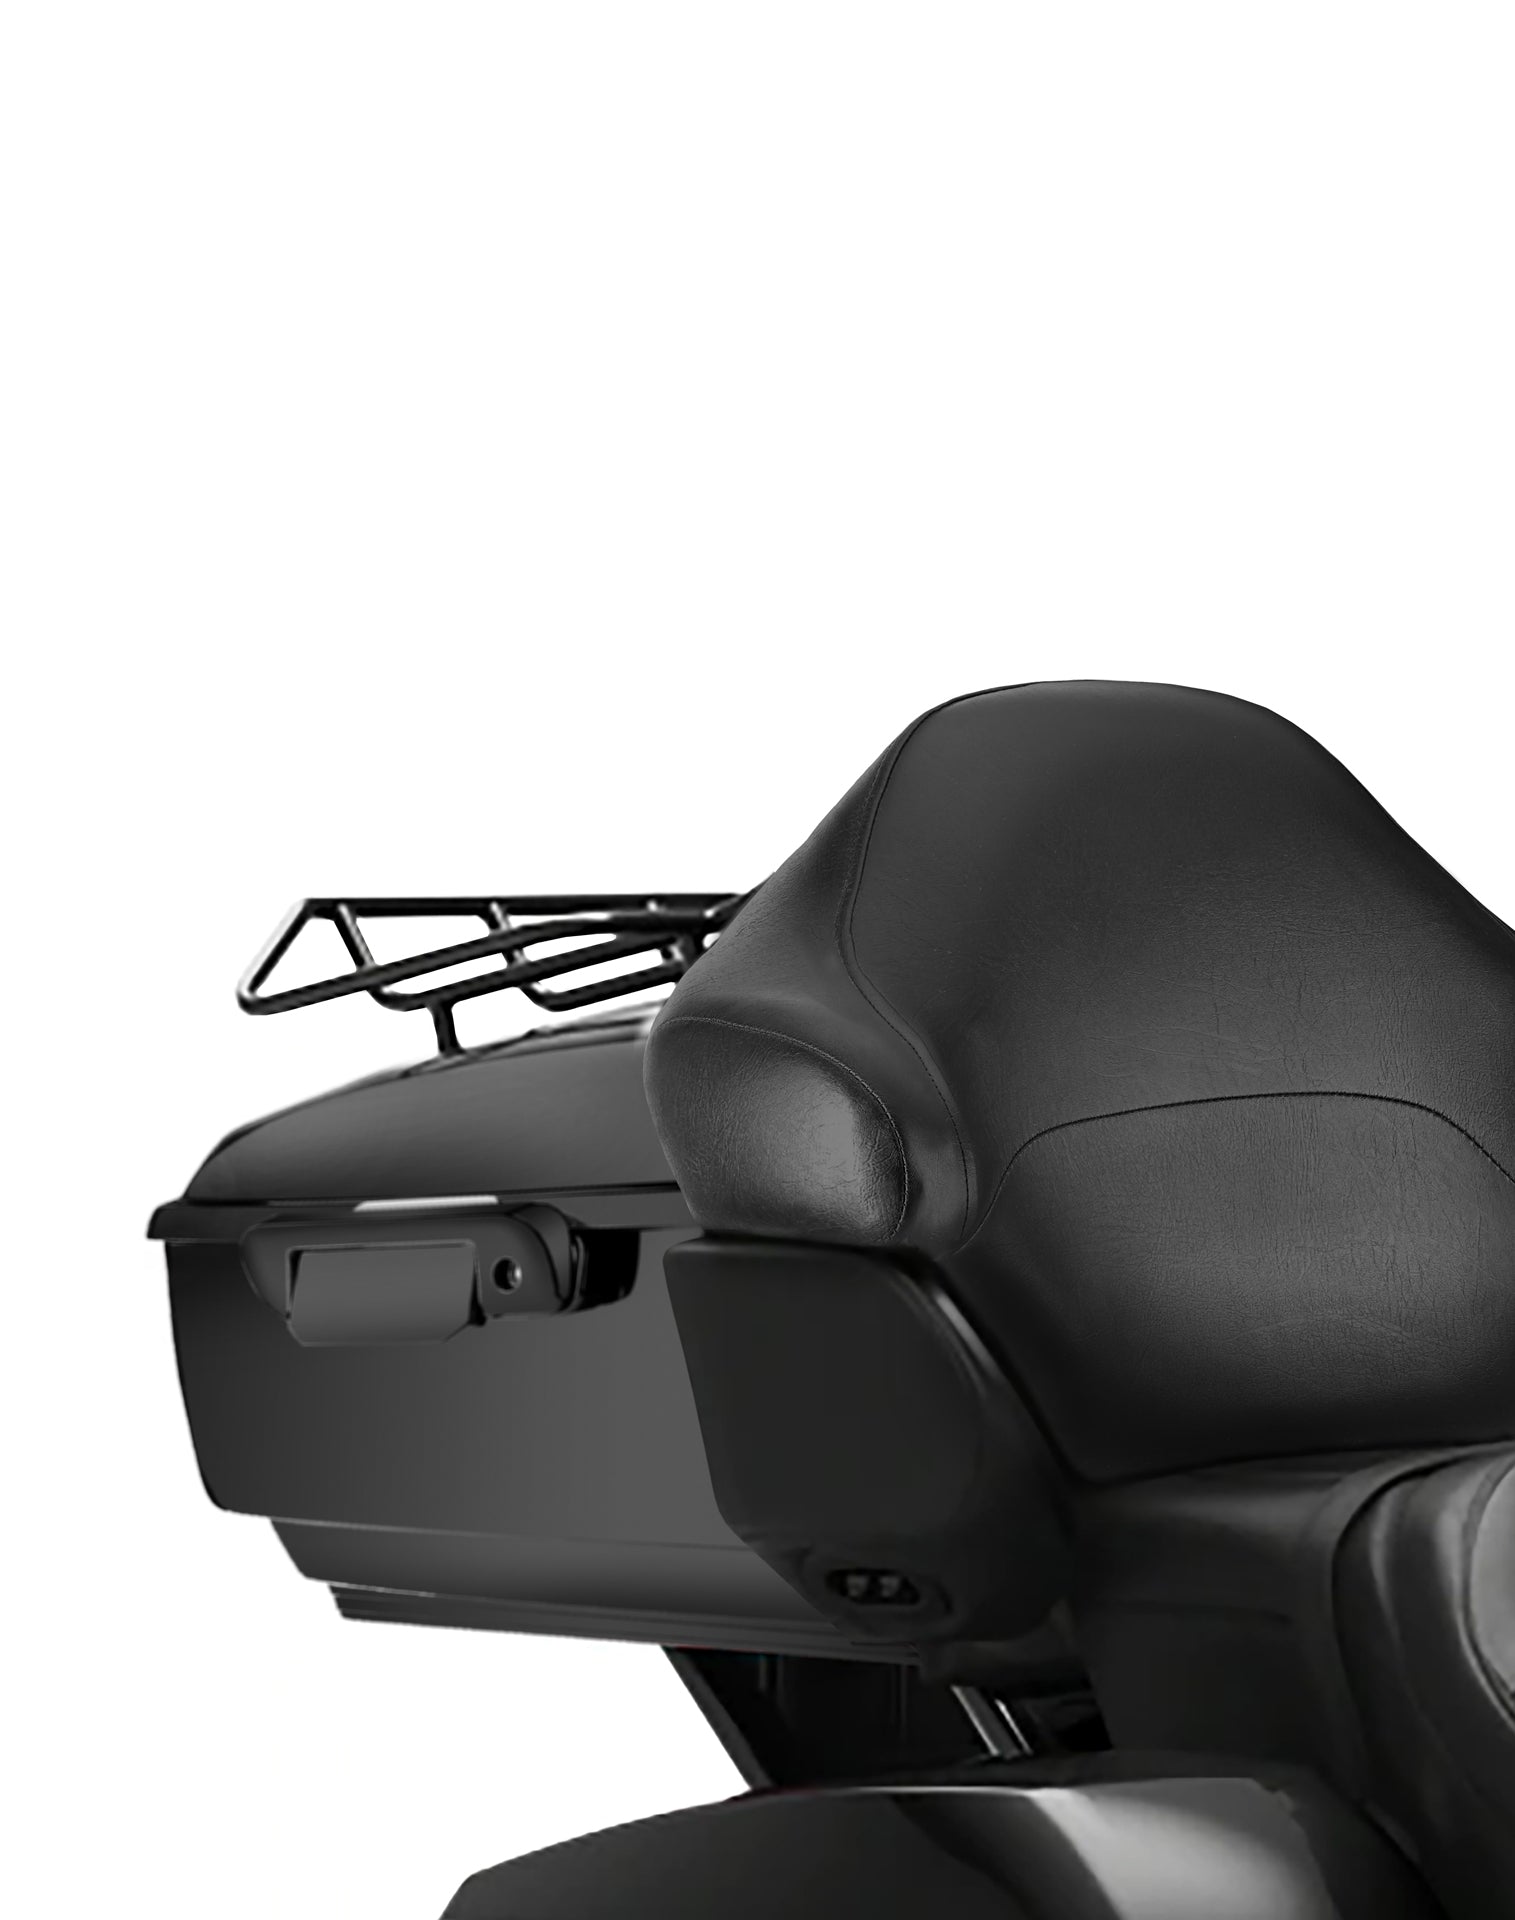 Viking Premium Extra Large Motorcycle Tour Pack for Harley Road Glide Backrest with Tourpack